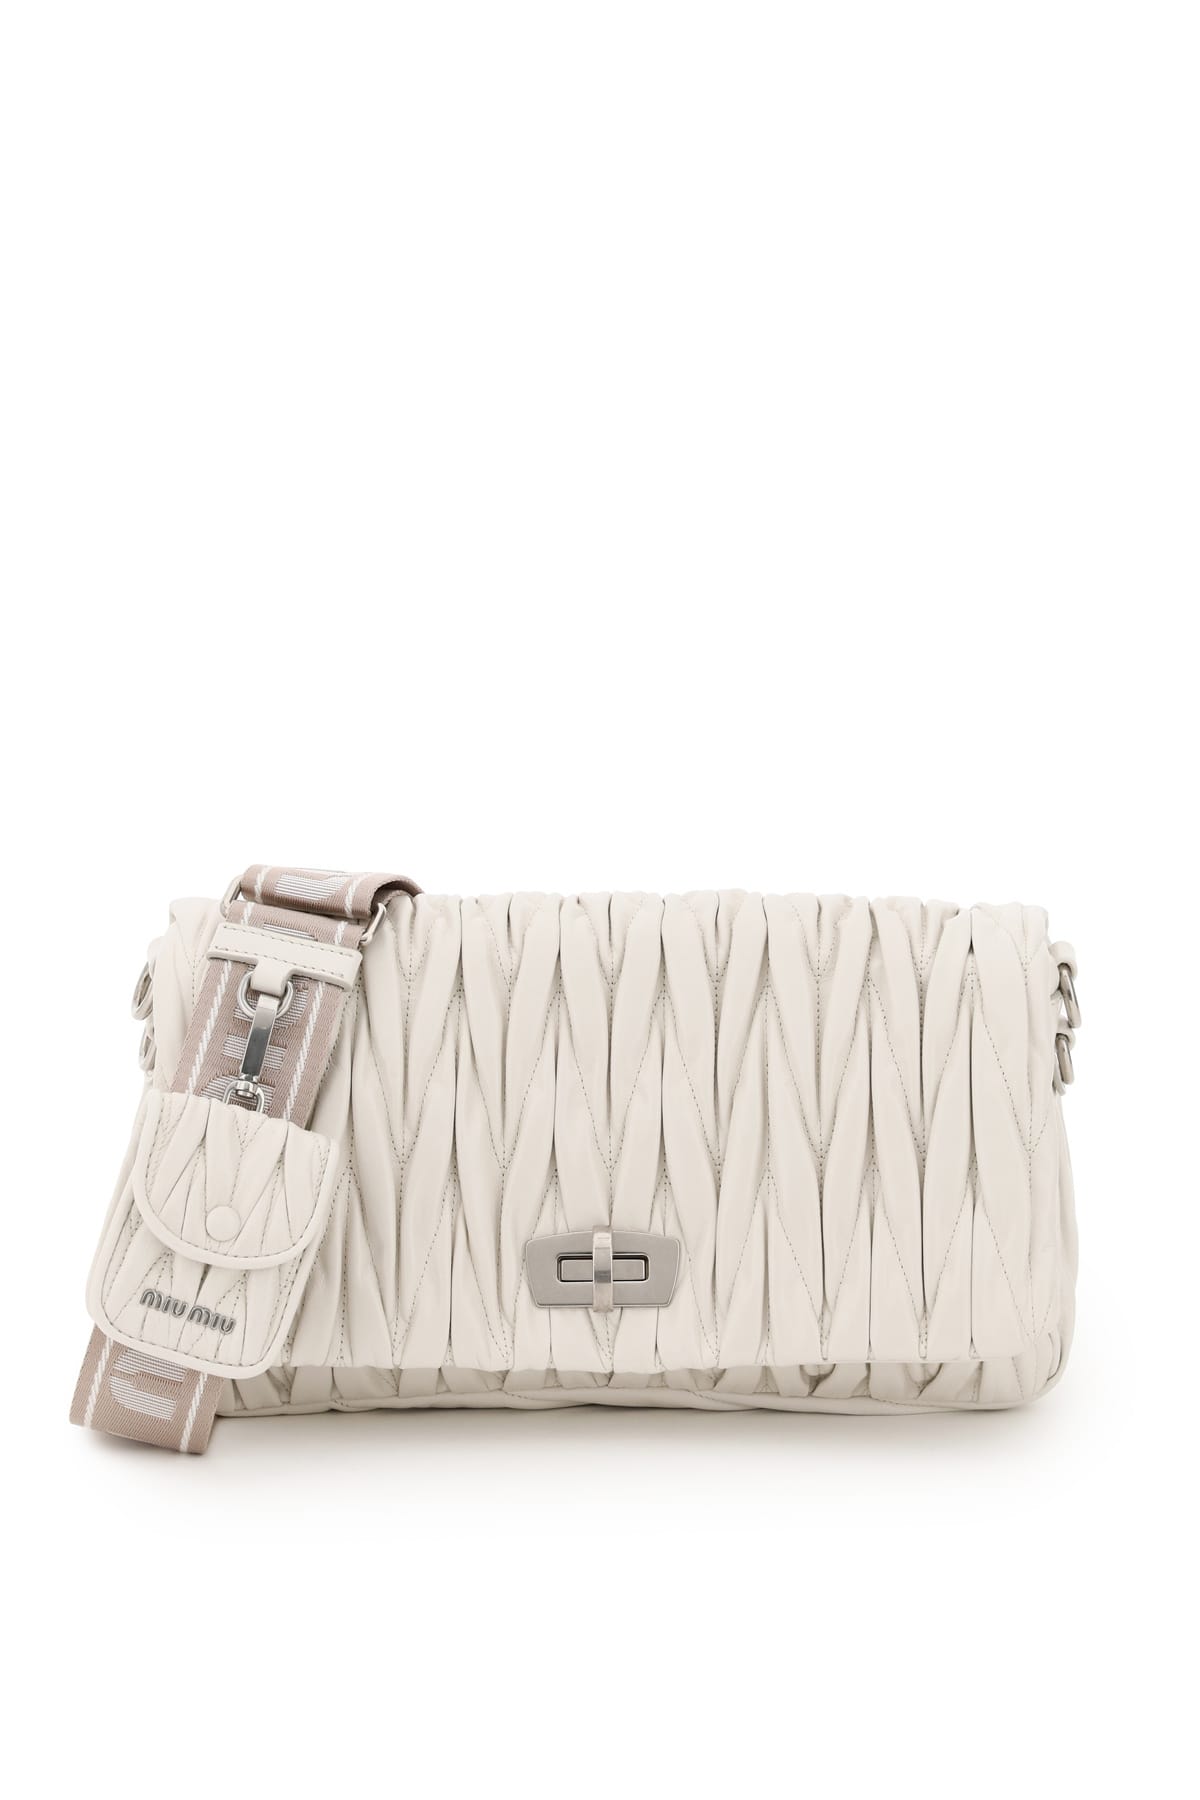 MIU MIU QUILTED SHOULDER BAG WITH POUCH,11903324